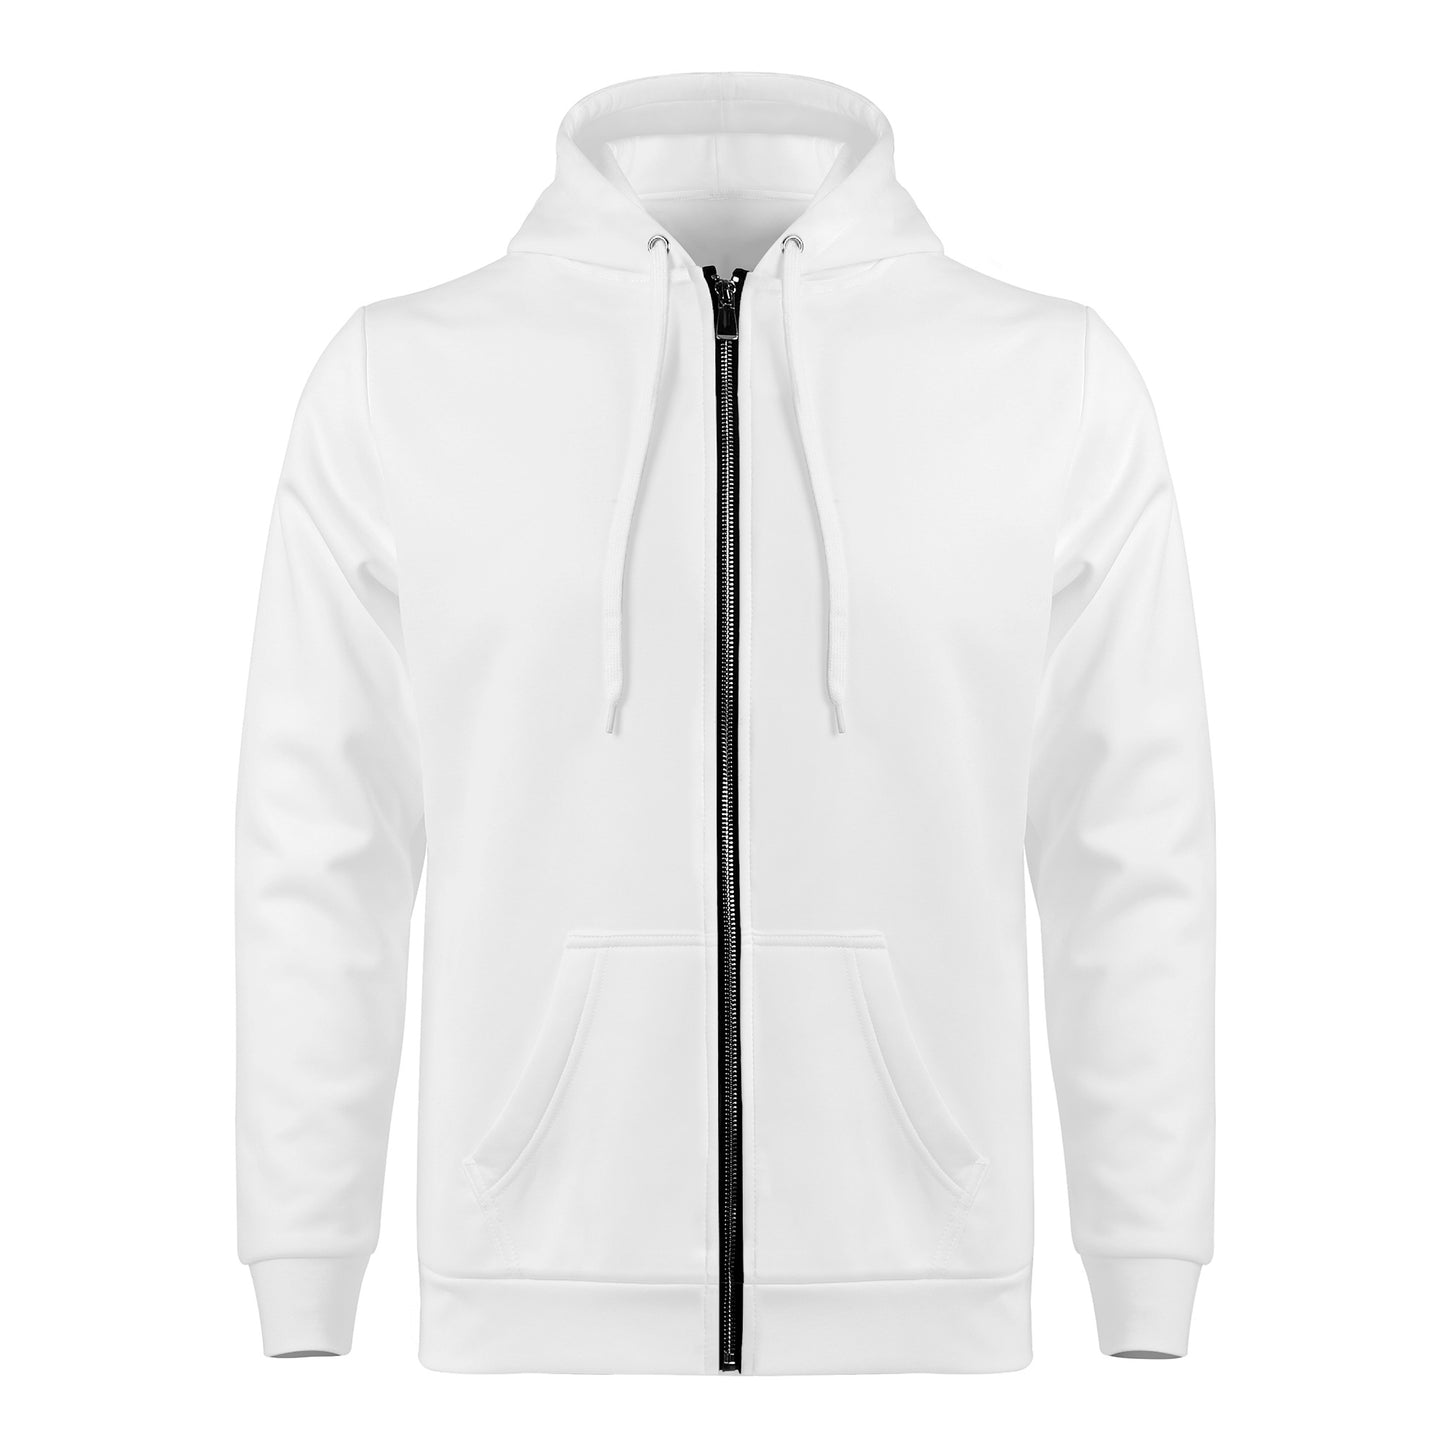 Create Your Own - Women's Fit All Over Print Zip Hoodie